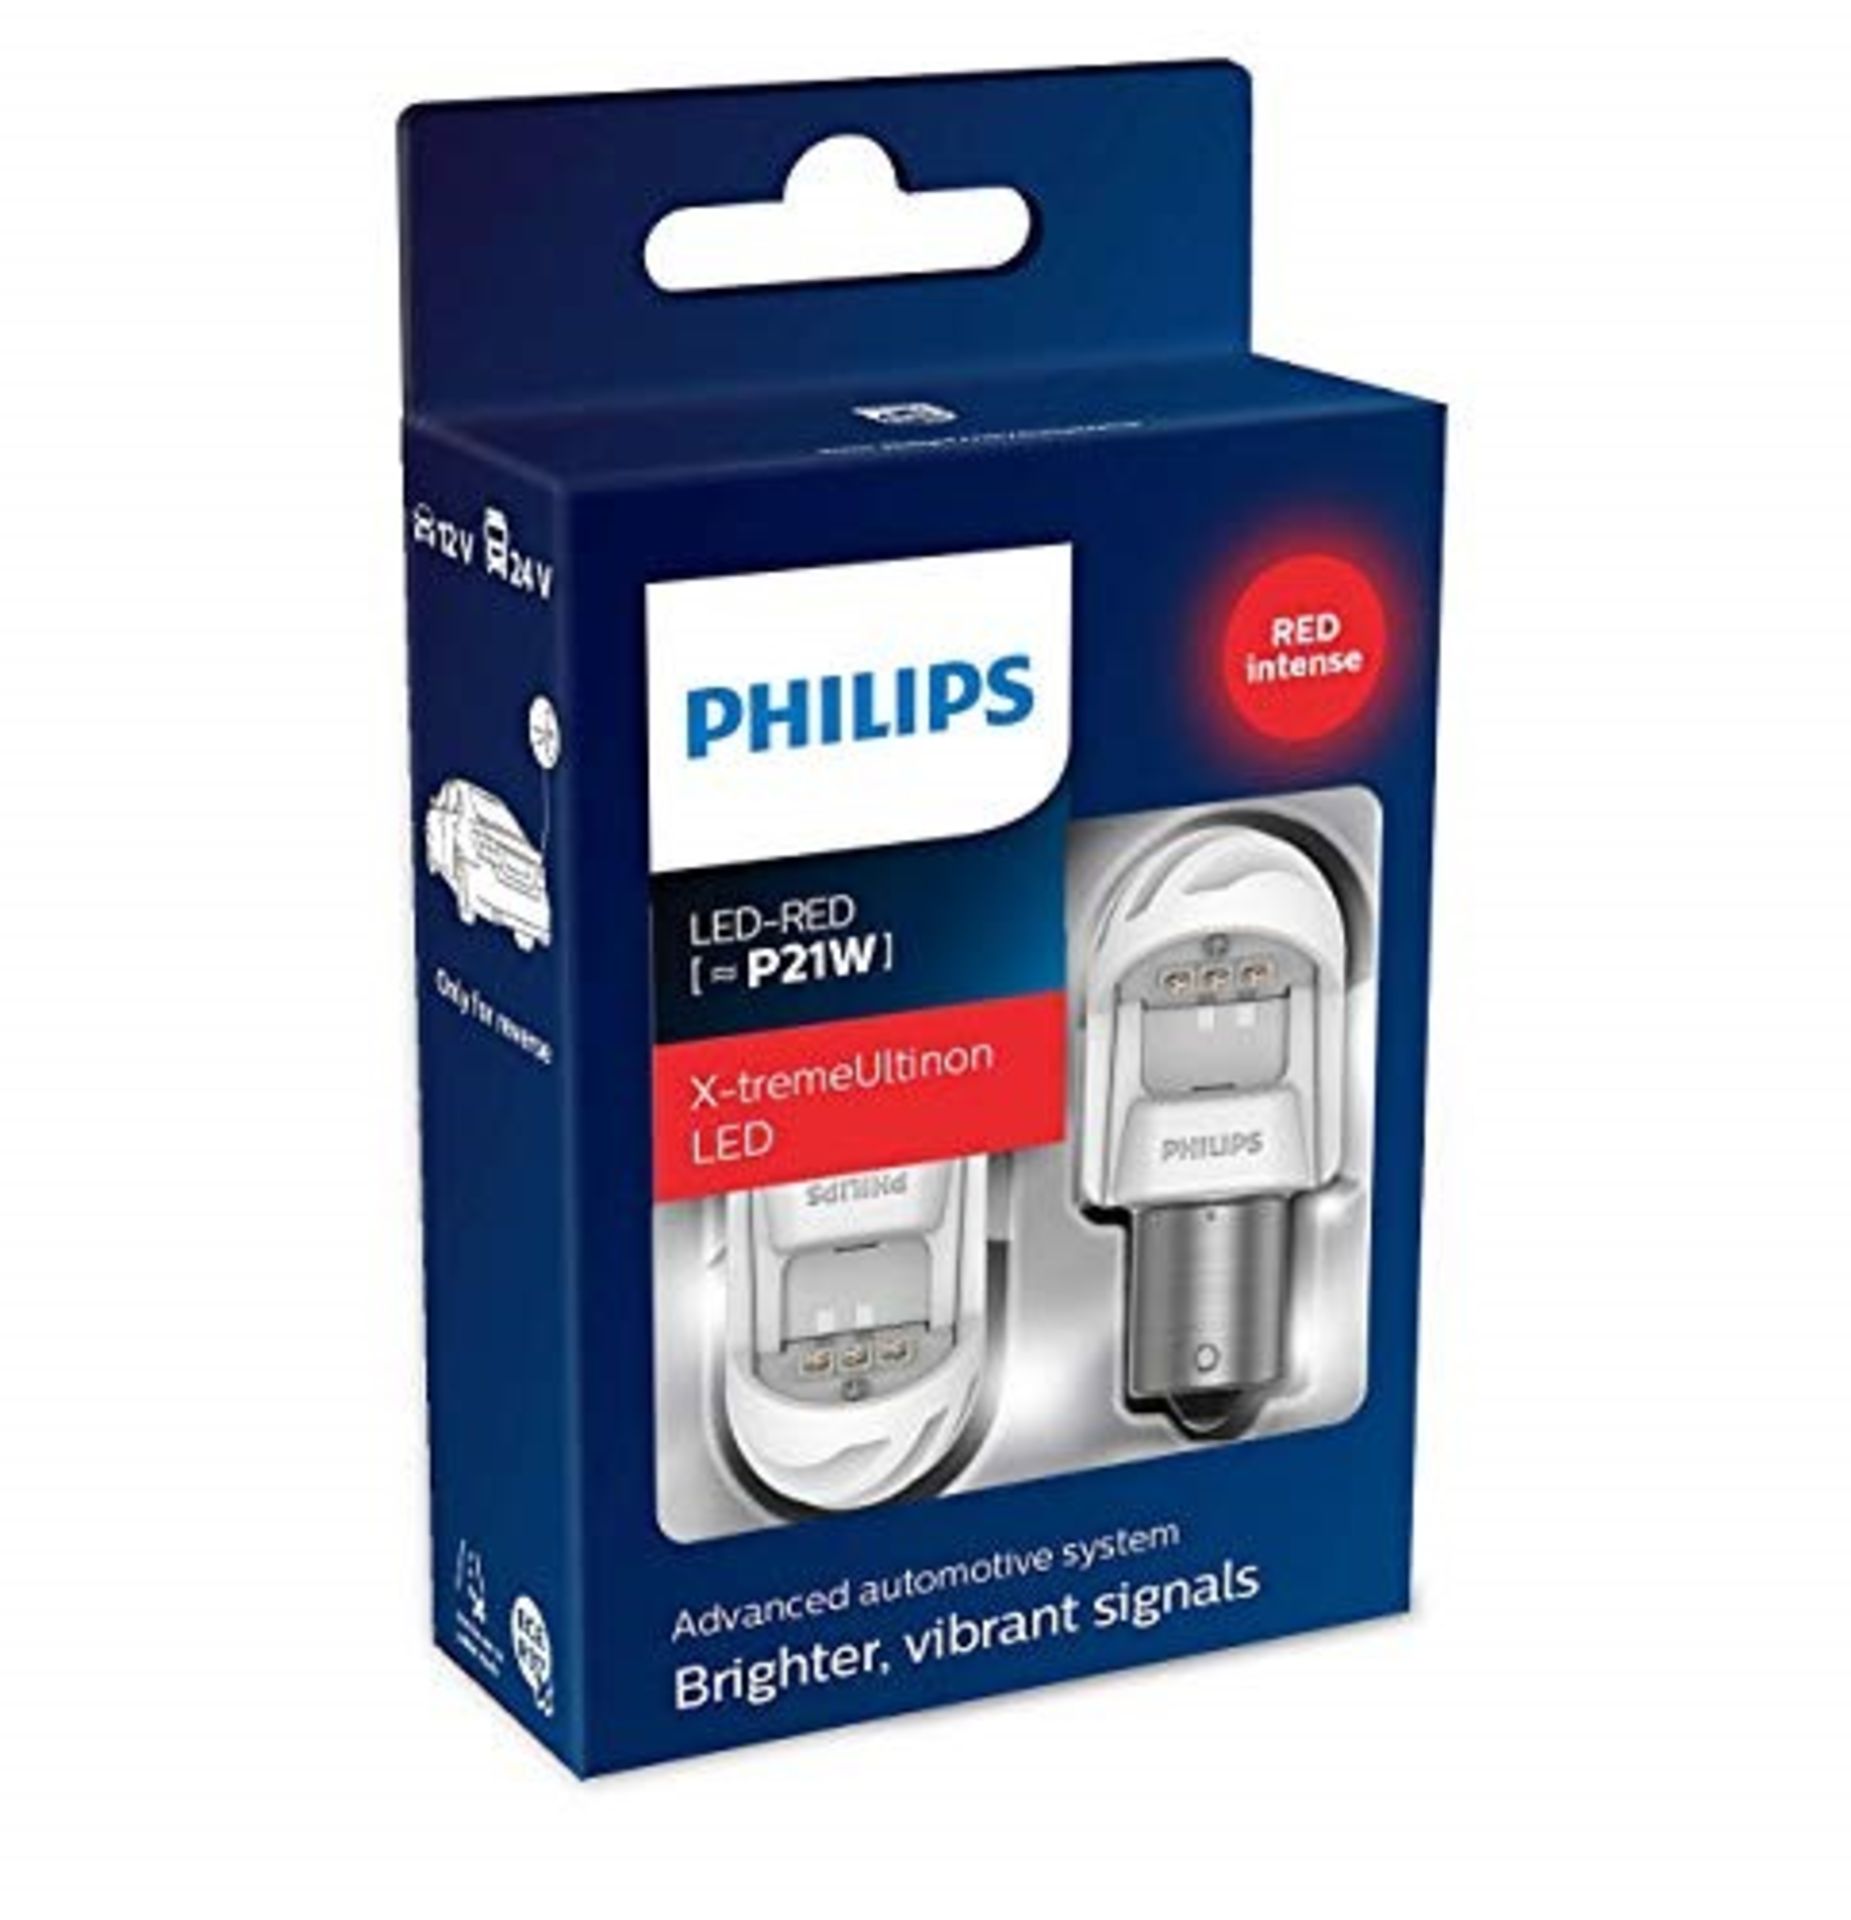 Philips 11498XURX2 LED car signaling Bulb (P21W red), Set of 2